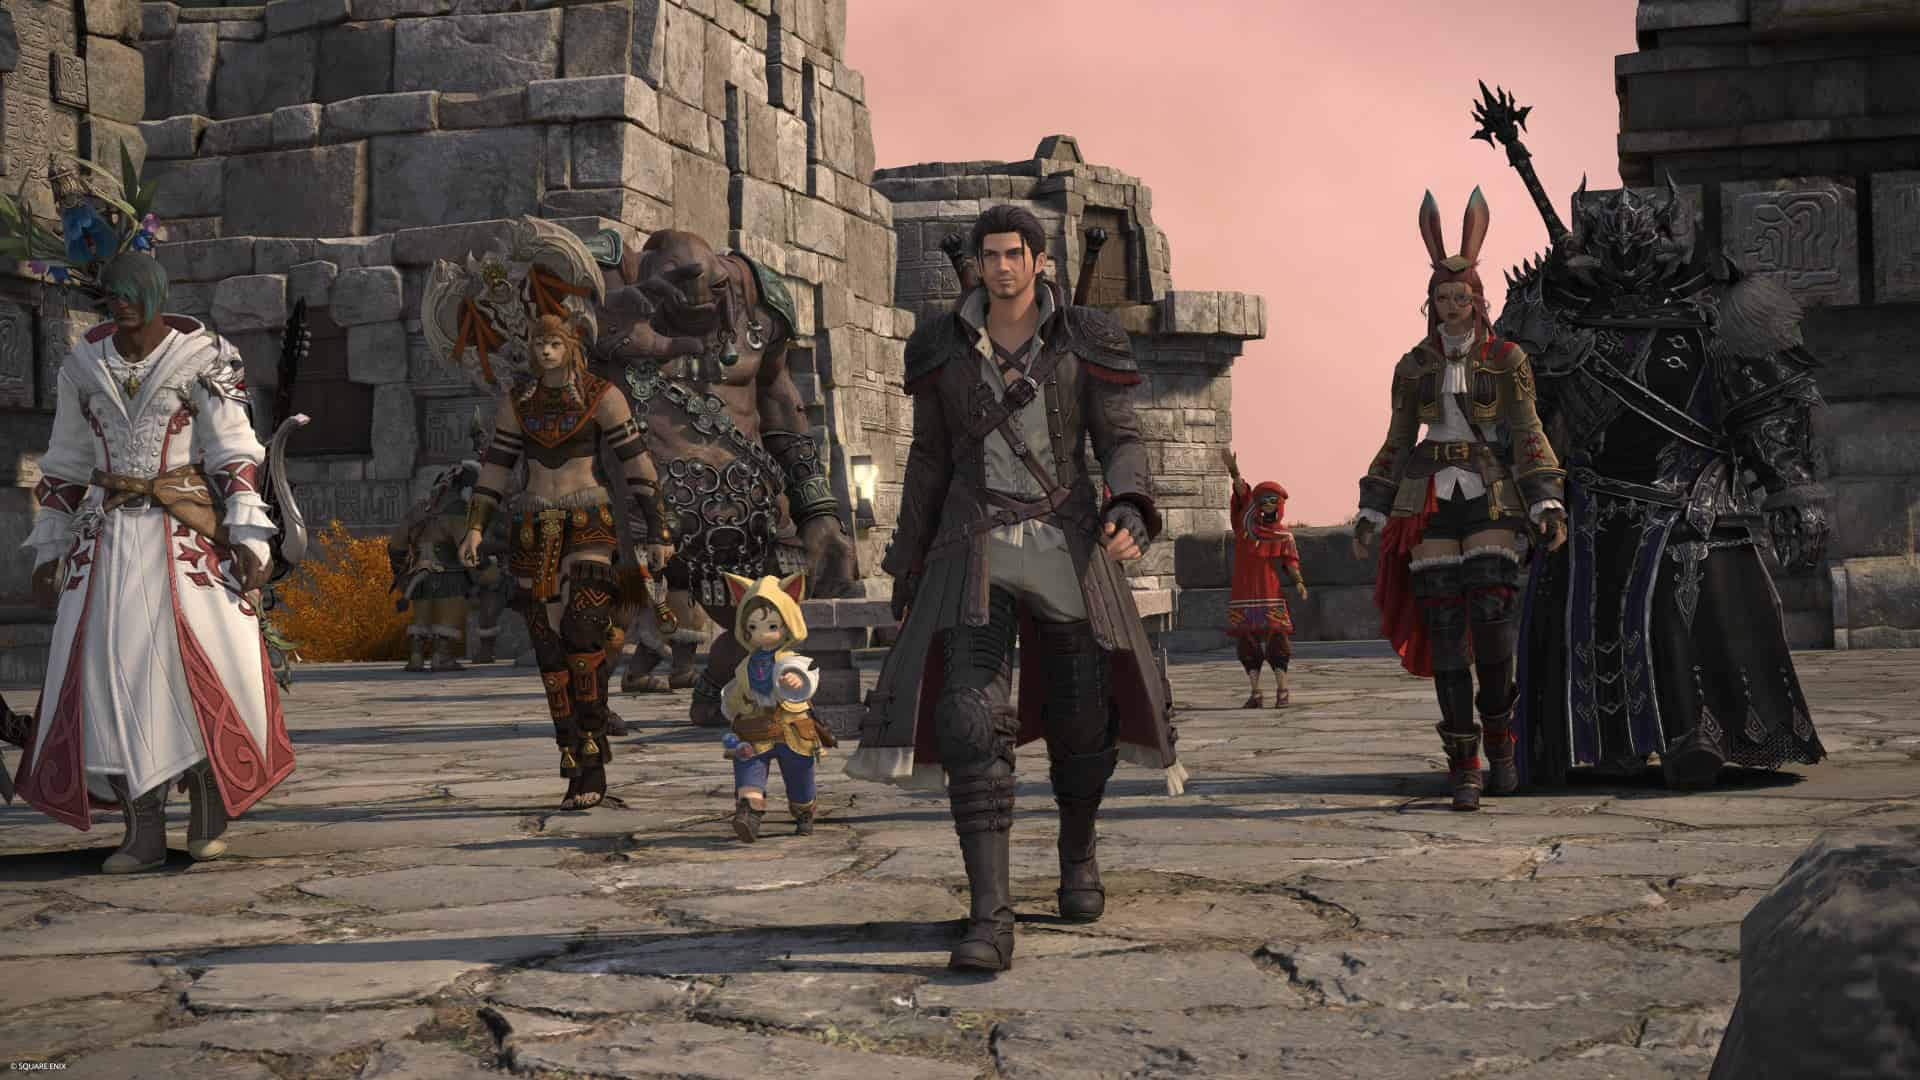 final fantasy 14 dawntrail - a group of charaters walk in line in a fantasy setting